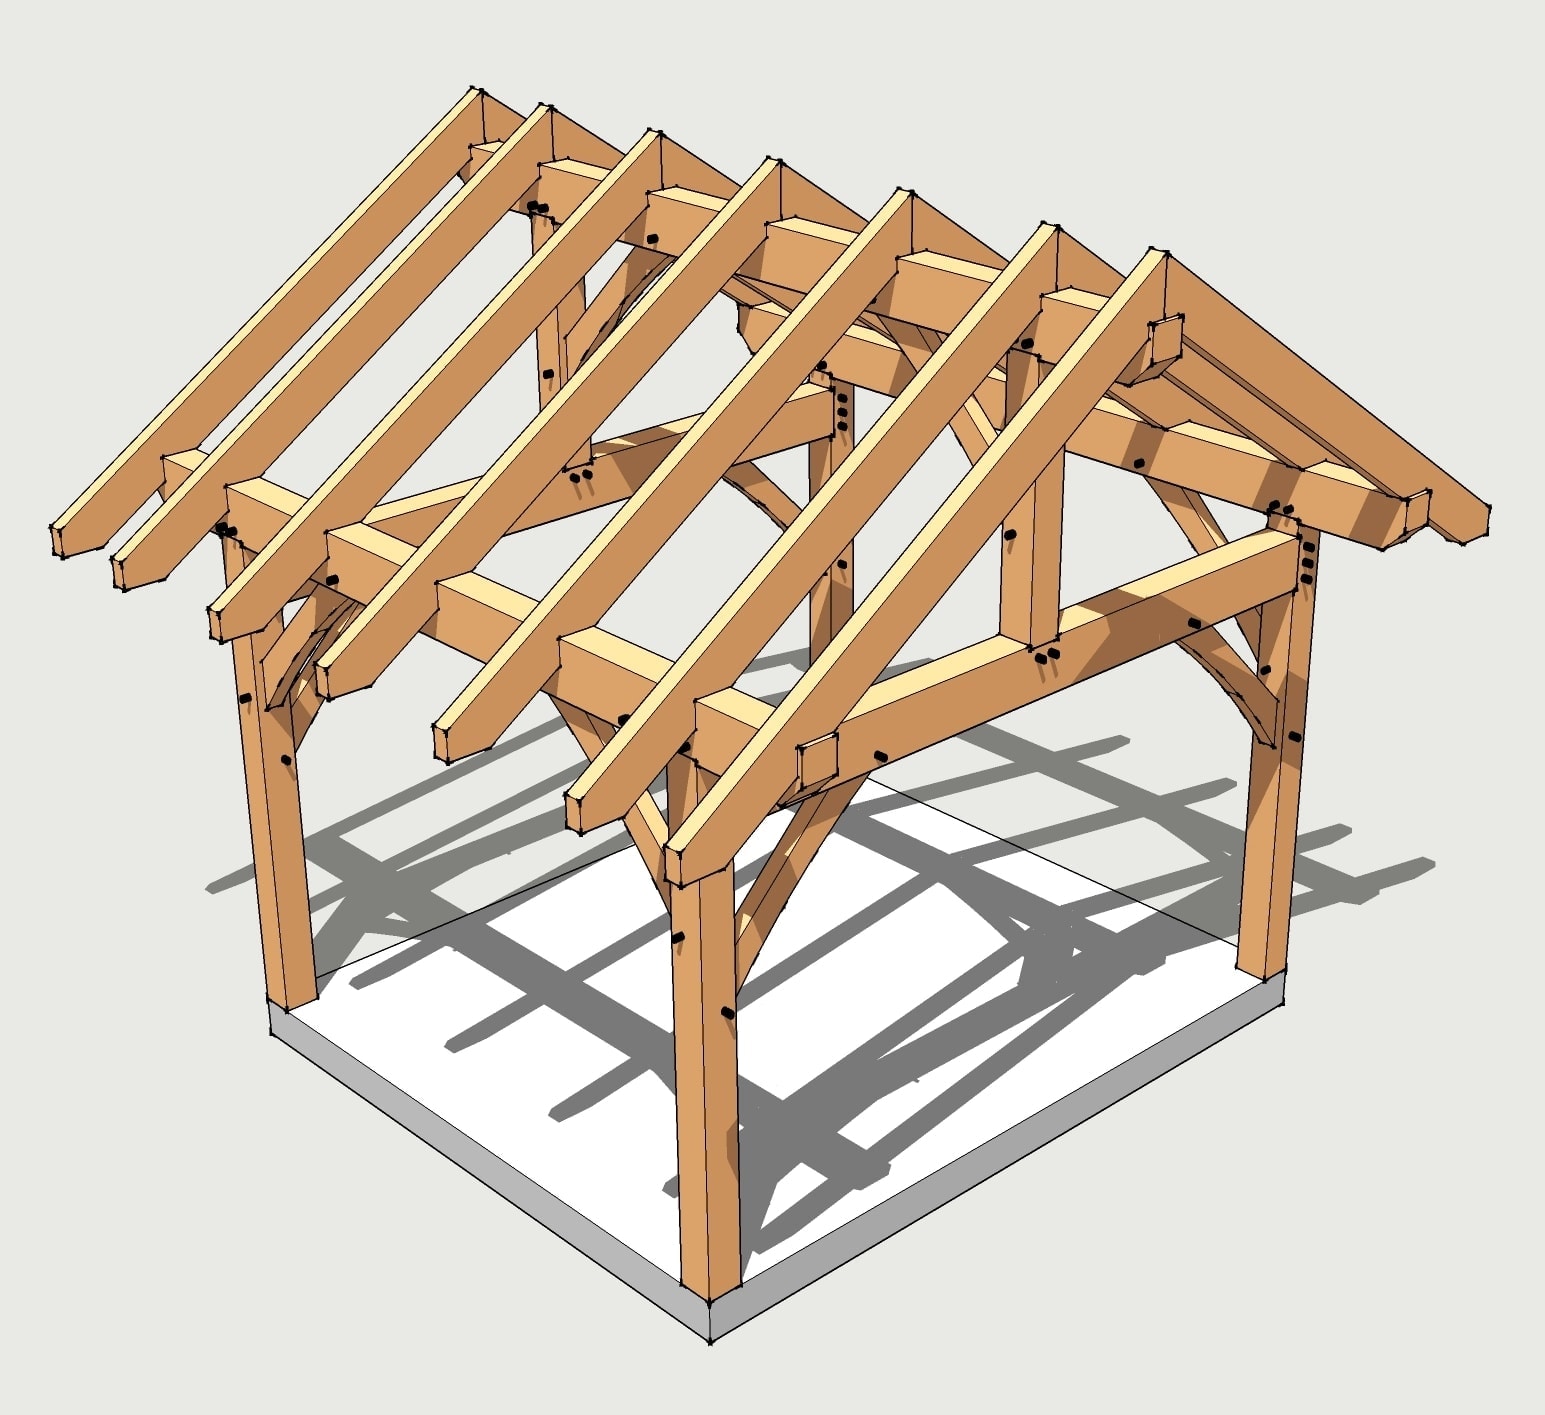  common rafter system with a 8″ roof pitch. It is 12 feet deep and 14